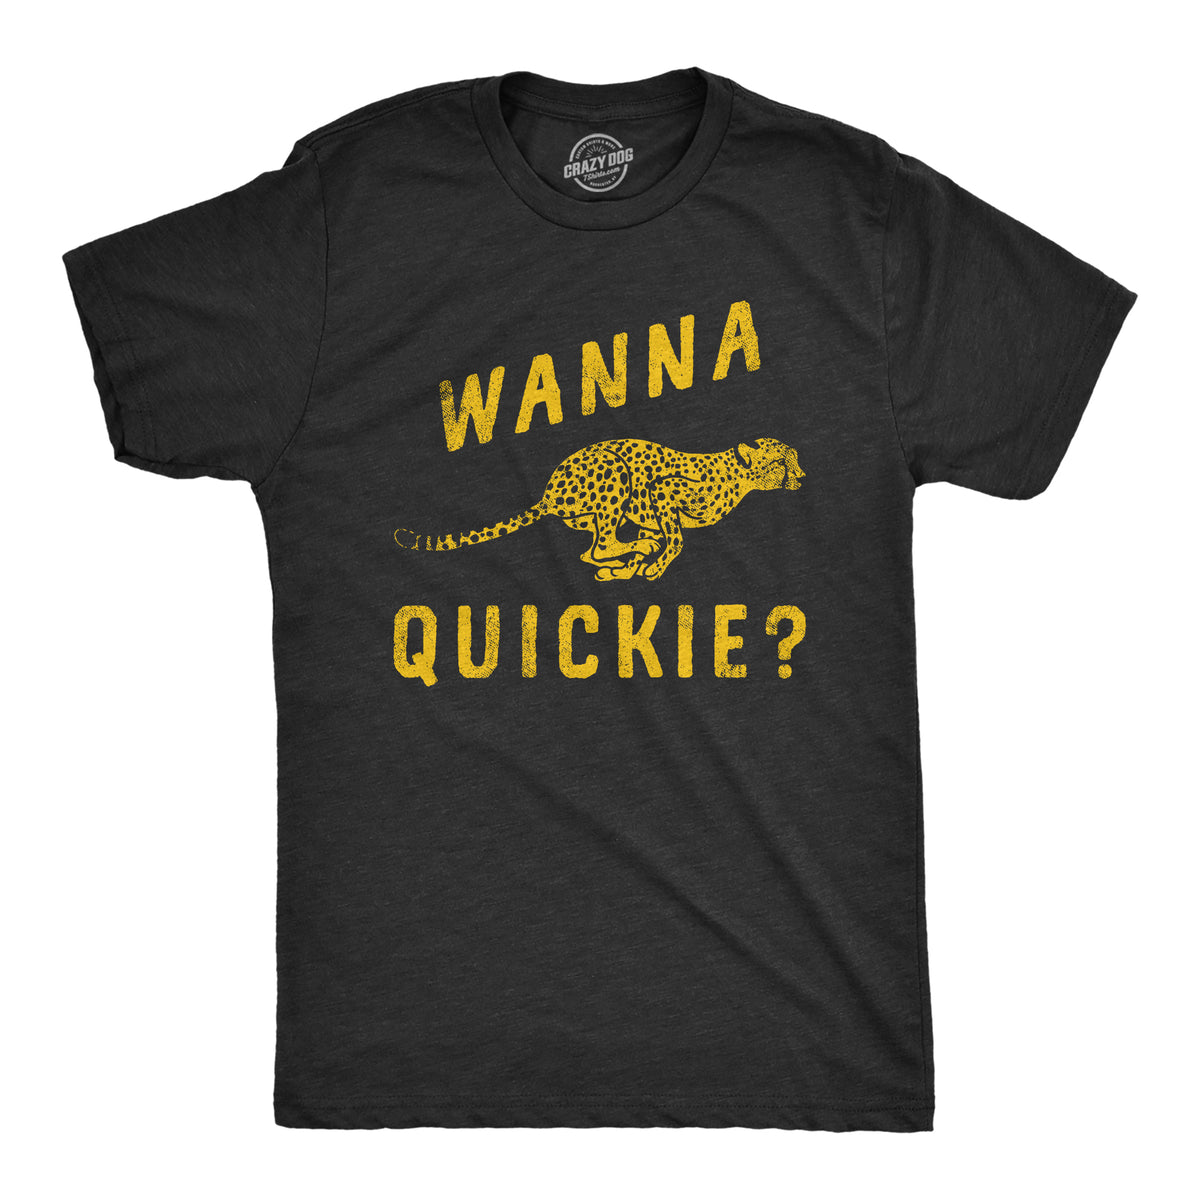 Funny Heather Black - QUICKIE Wanna Quickie Mens T Shirt Nerdy Sex sarcastic Tee